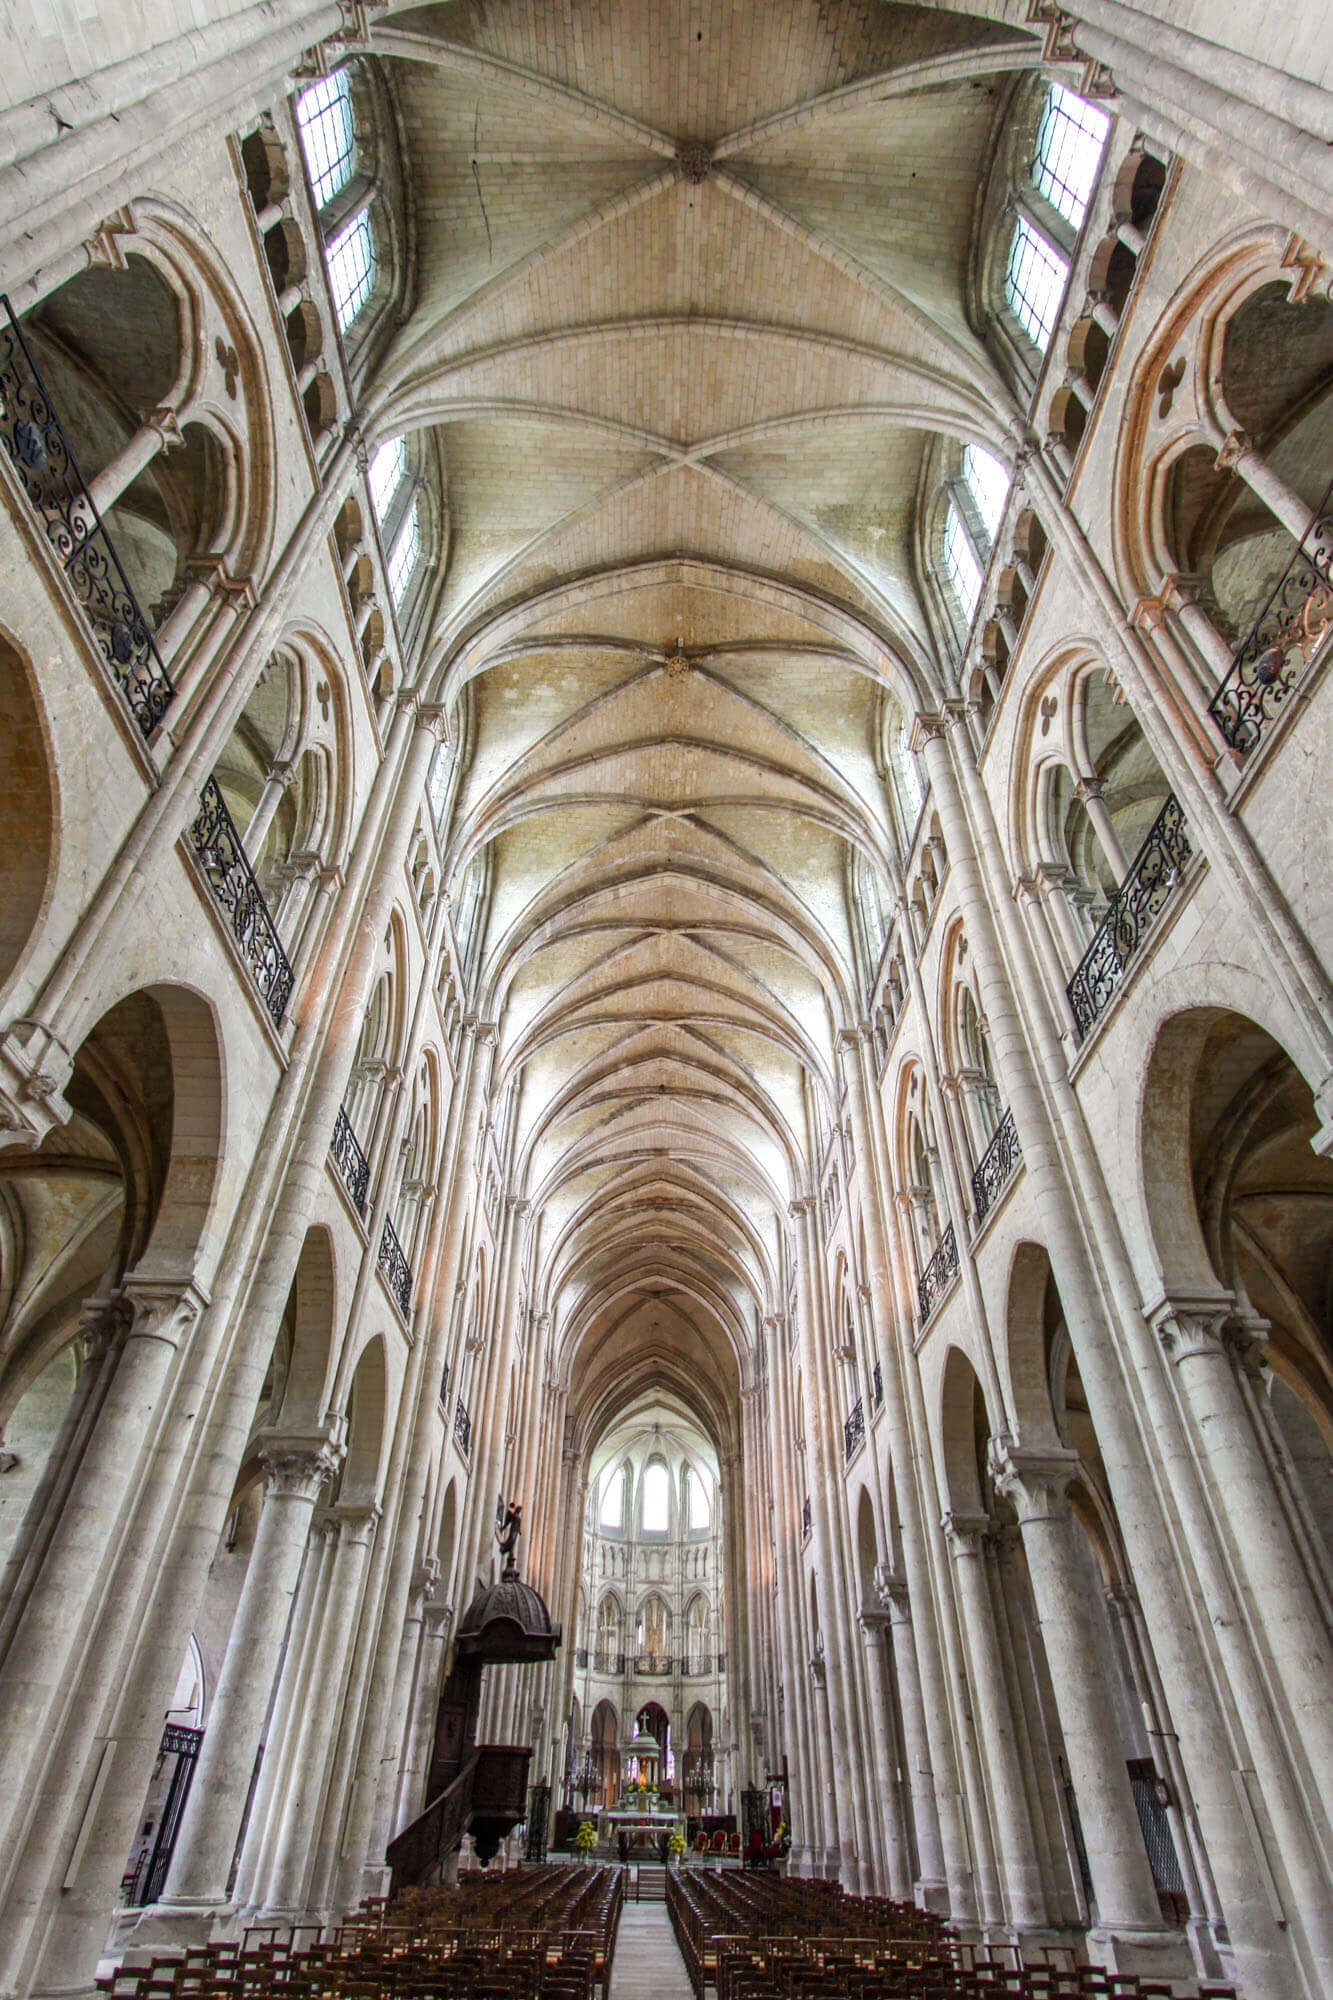 The nave interior of the Noyon Cathedral